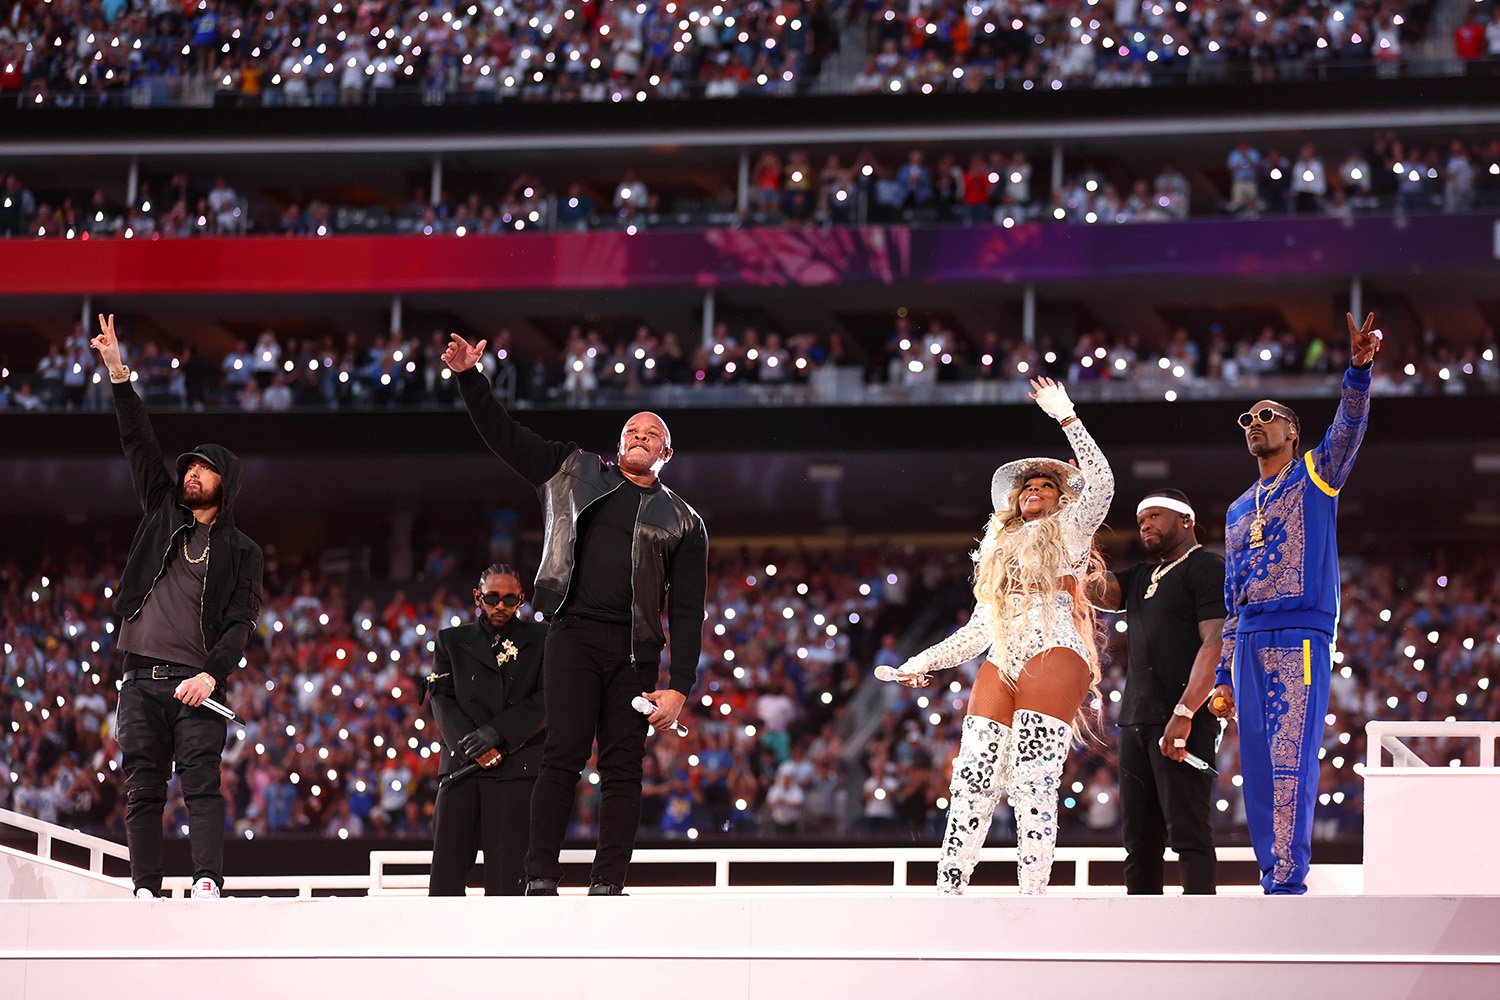 The Curtain Falls on Pepsi's Super Bowl Halftime Show Run